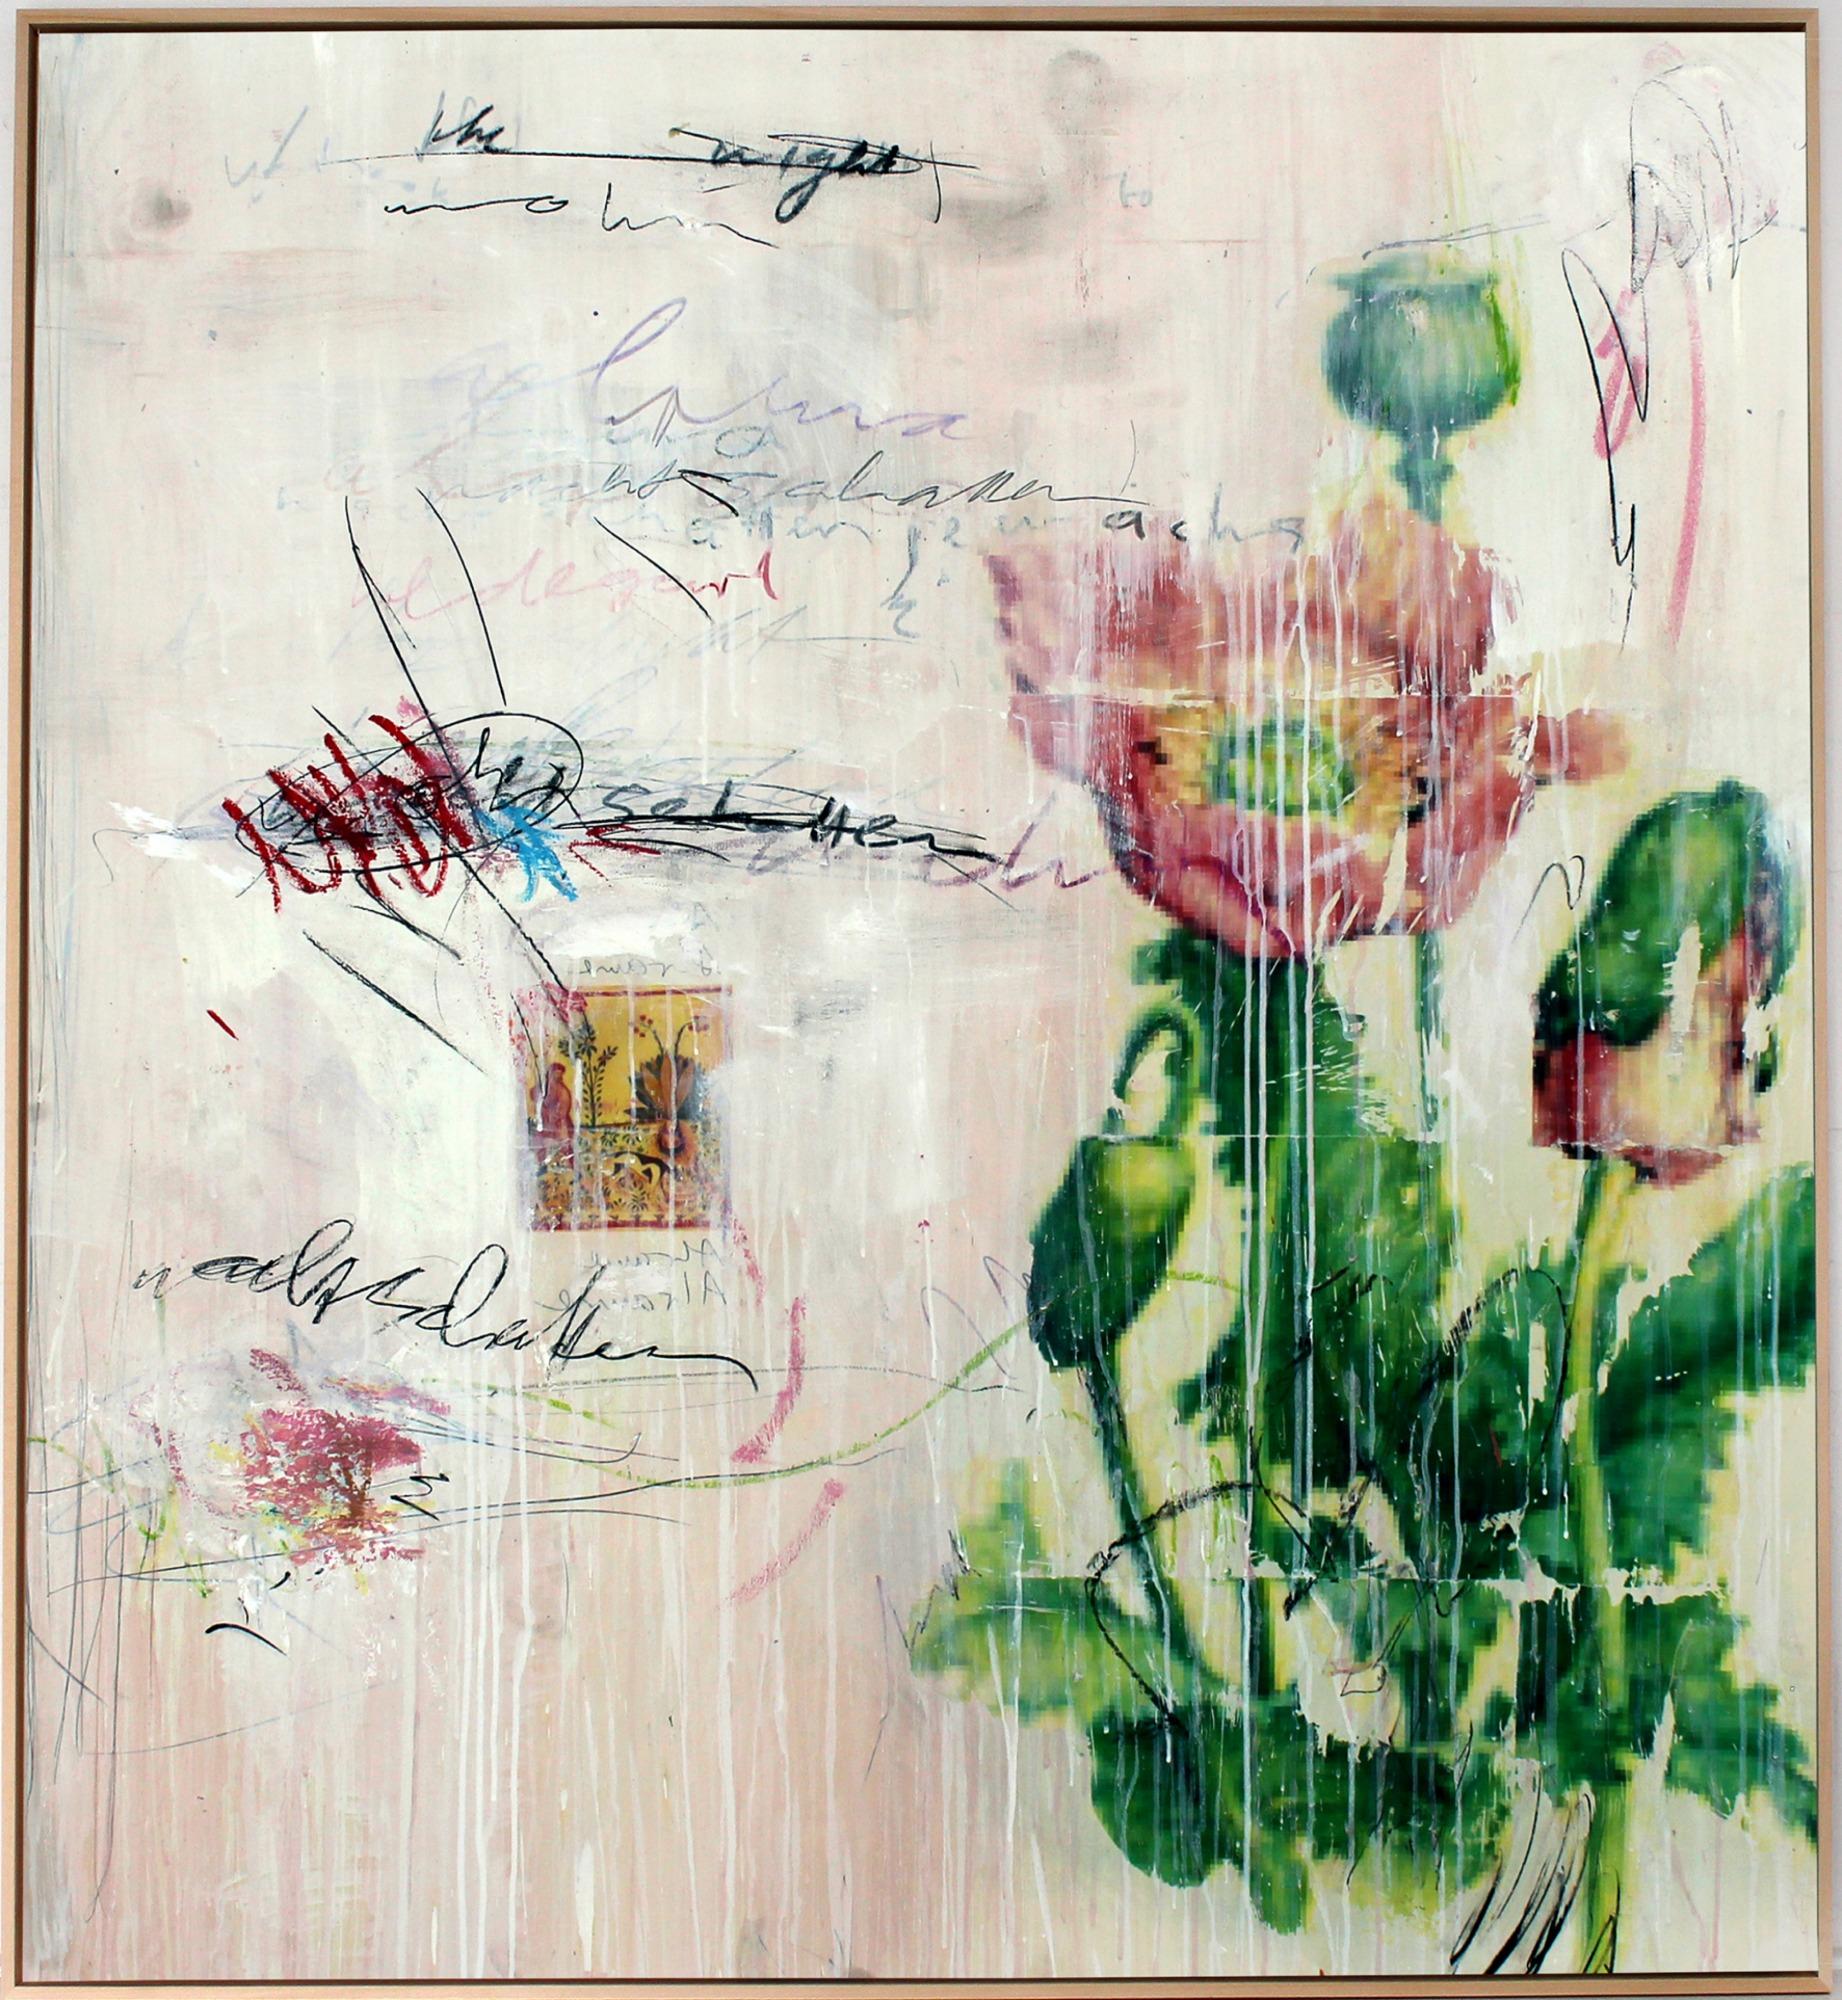 'Alcuna' abstract mixed-media on wood by Stefan Heyer: oil, photo-transfer, oil stick, crayon, pencil on wood

'Alcuna' is a mixed-media art piece by Stefan Heyer. Despite its wild nature, the mood of the collage is very soft and romantic. With